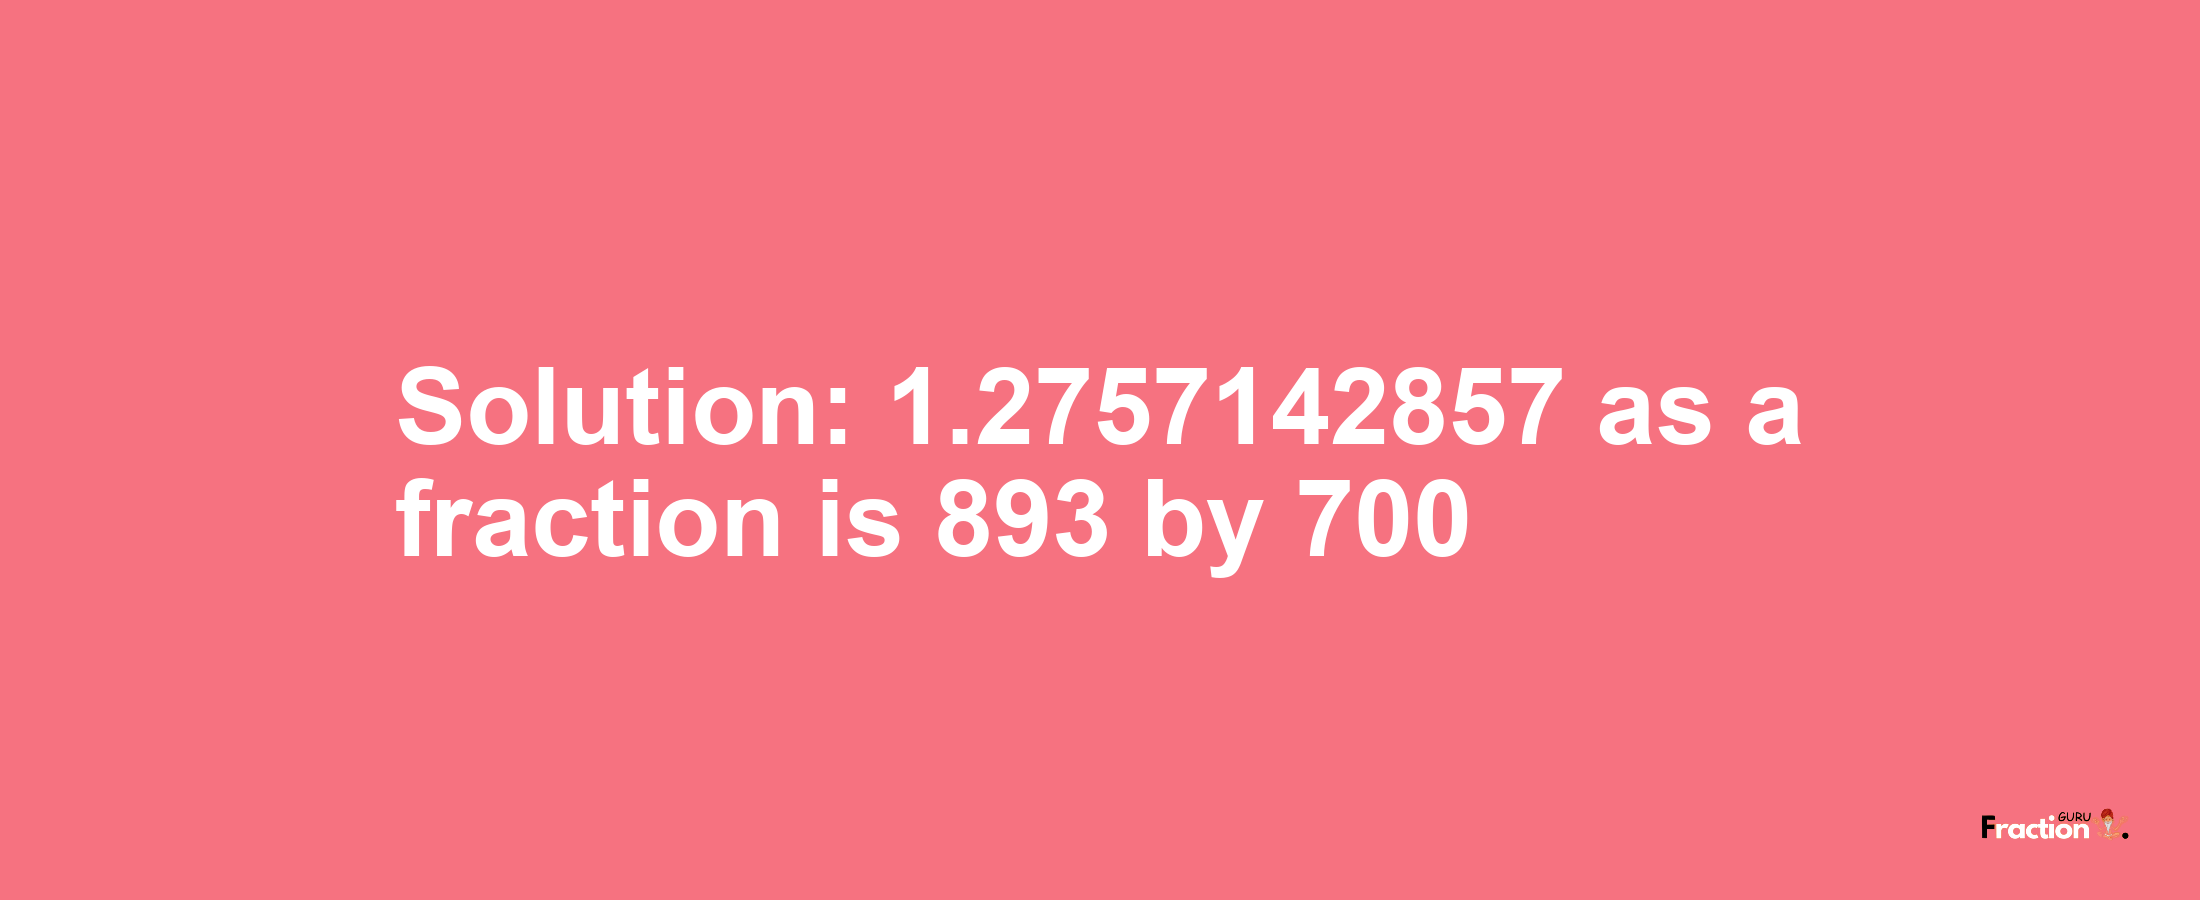 Solution:1.2757142857 as a fraction is 893/700